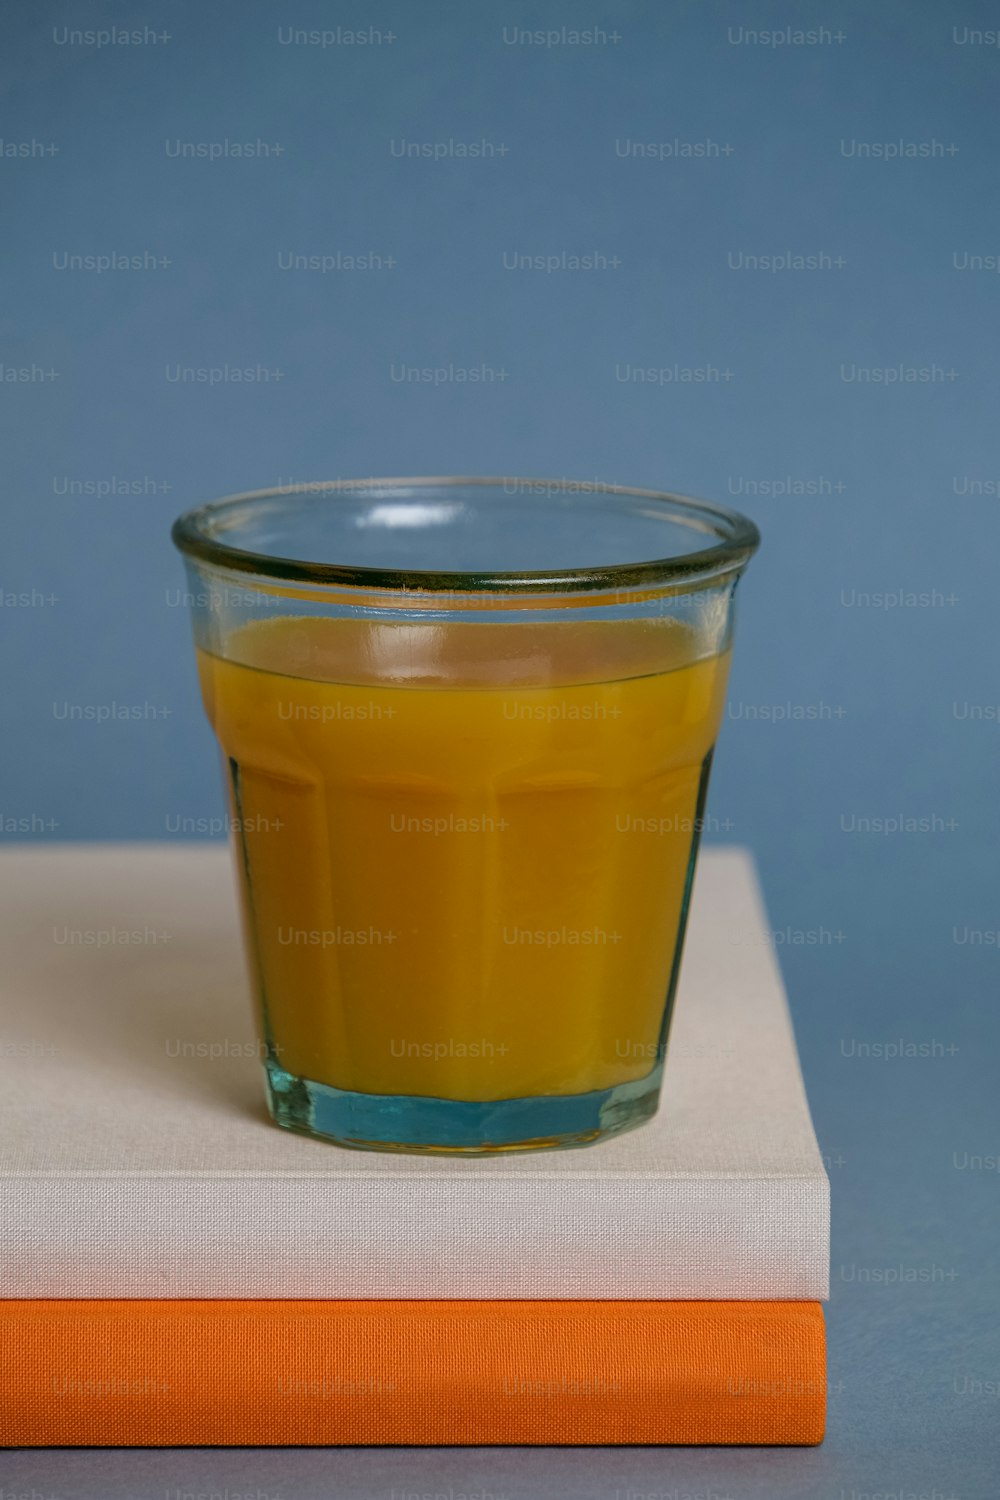 a glass of orange juice sitting on top of a book